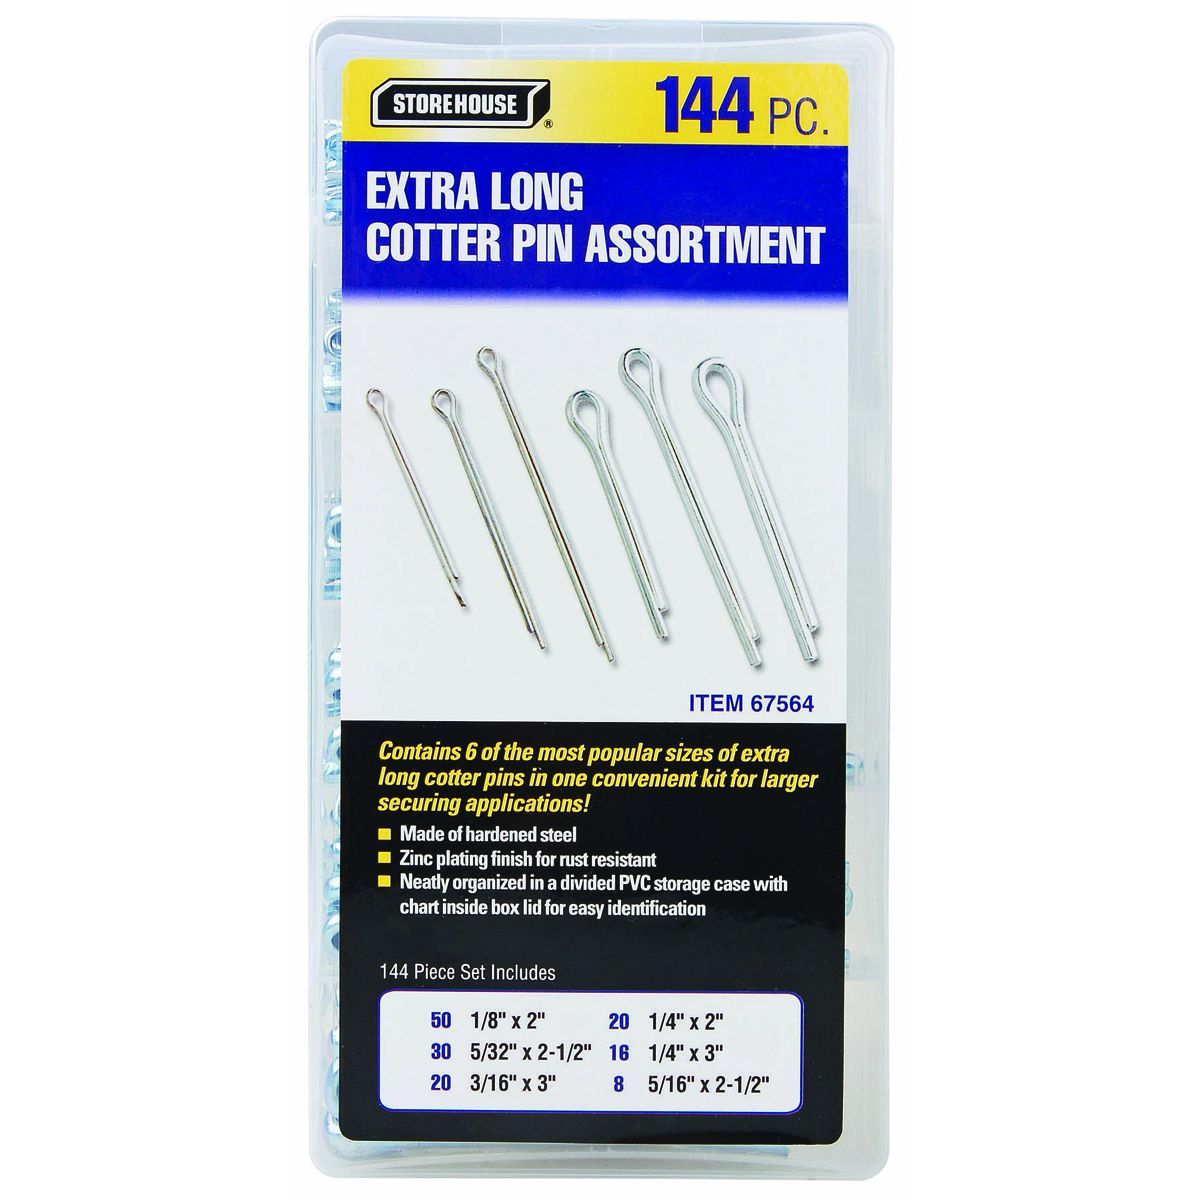 STOREHOUSE 144 Piece Extra Long Cotter Pin Assortment